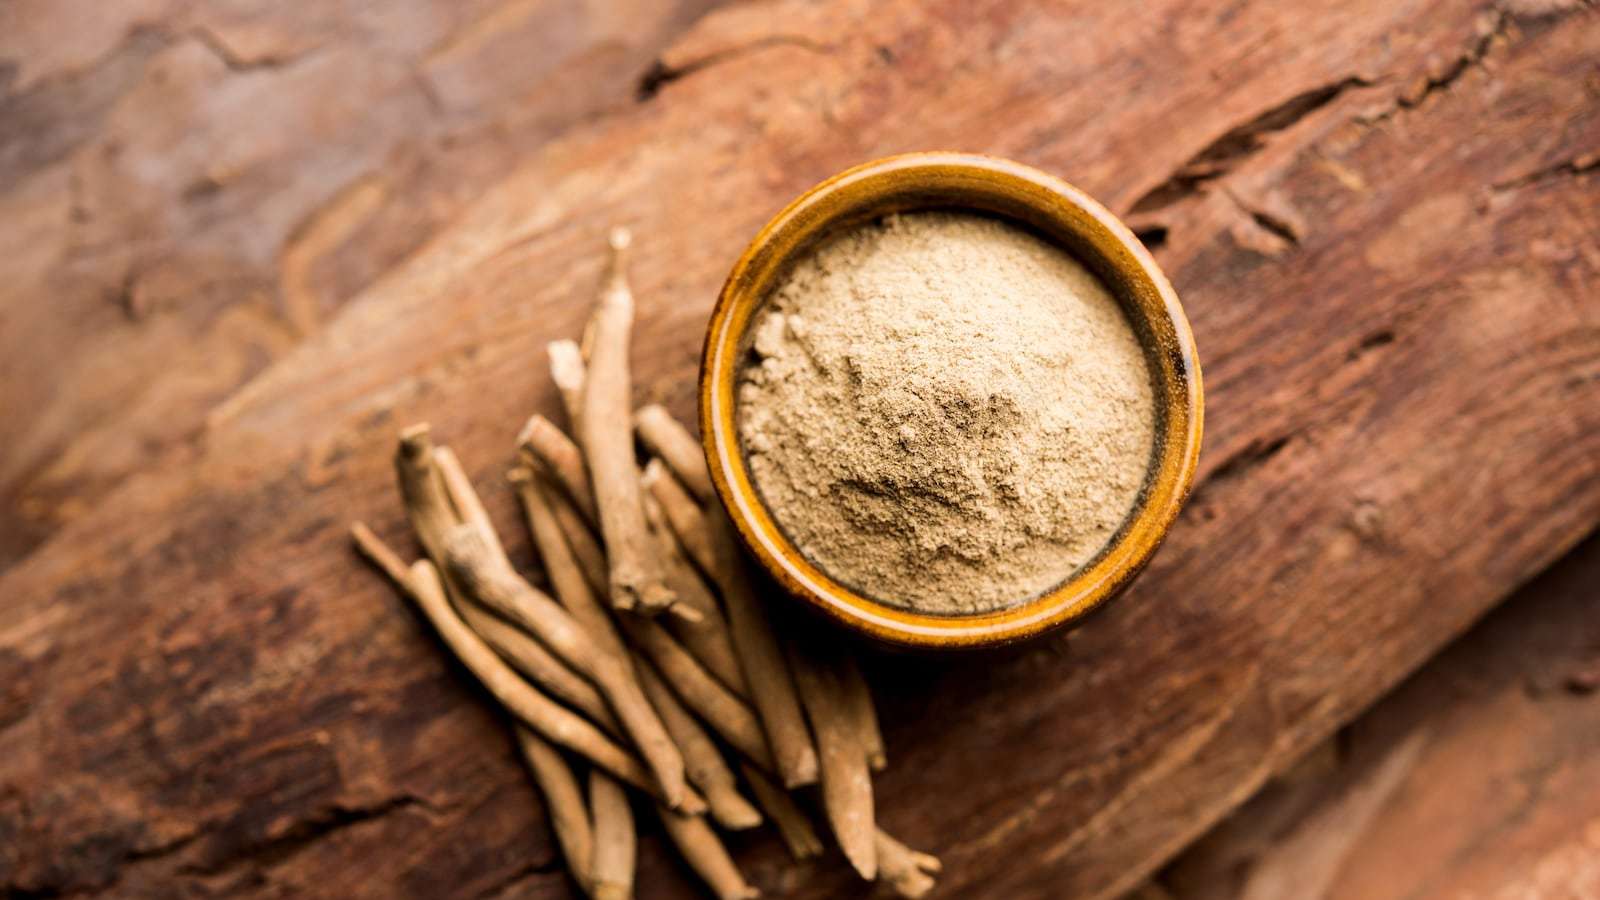 What Is Ashwagandha & How Do You Use It?